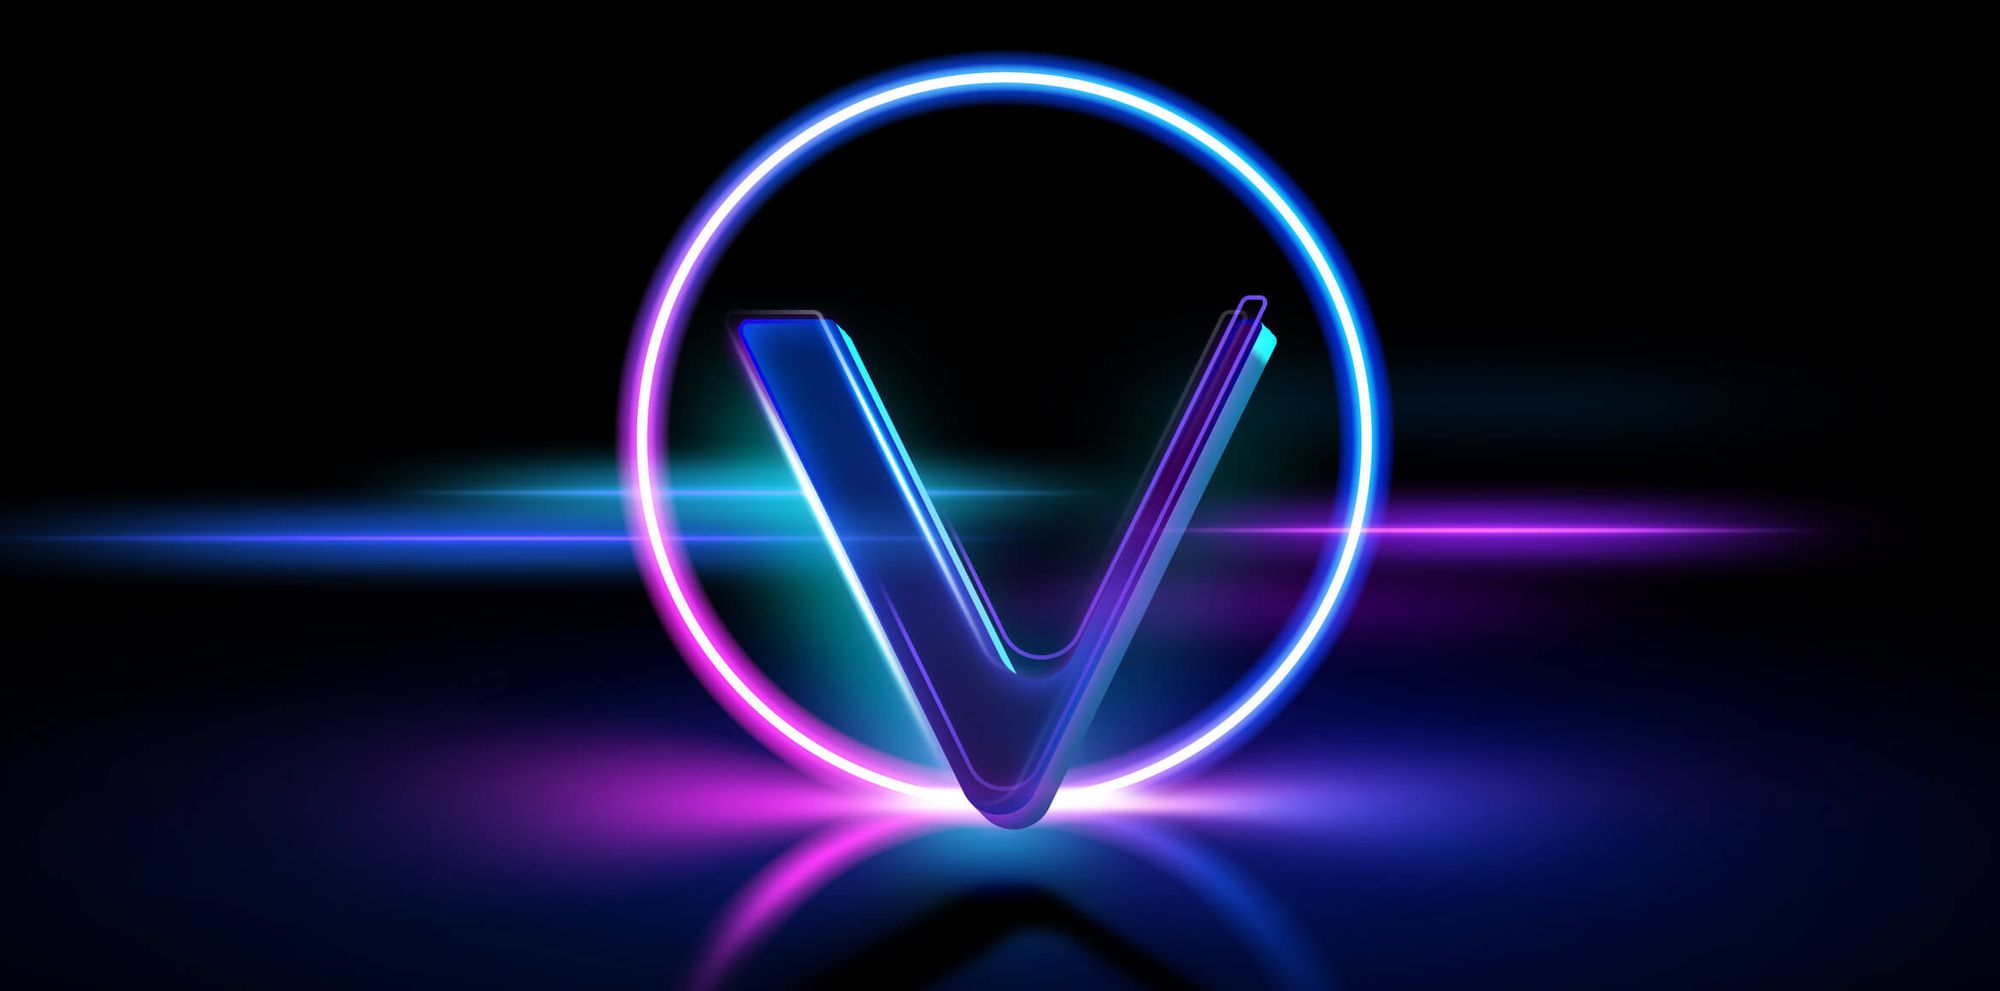 can you buy vechain on crypto.com